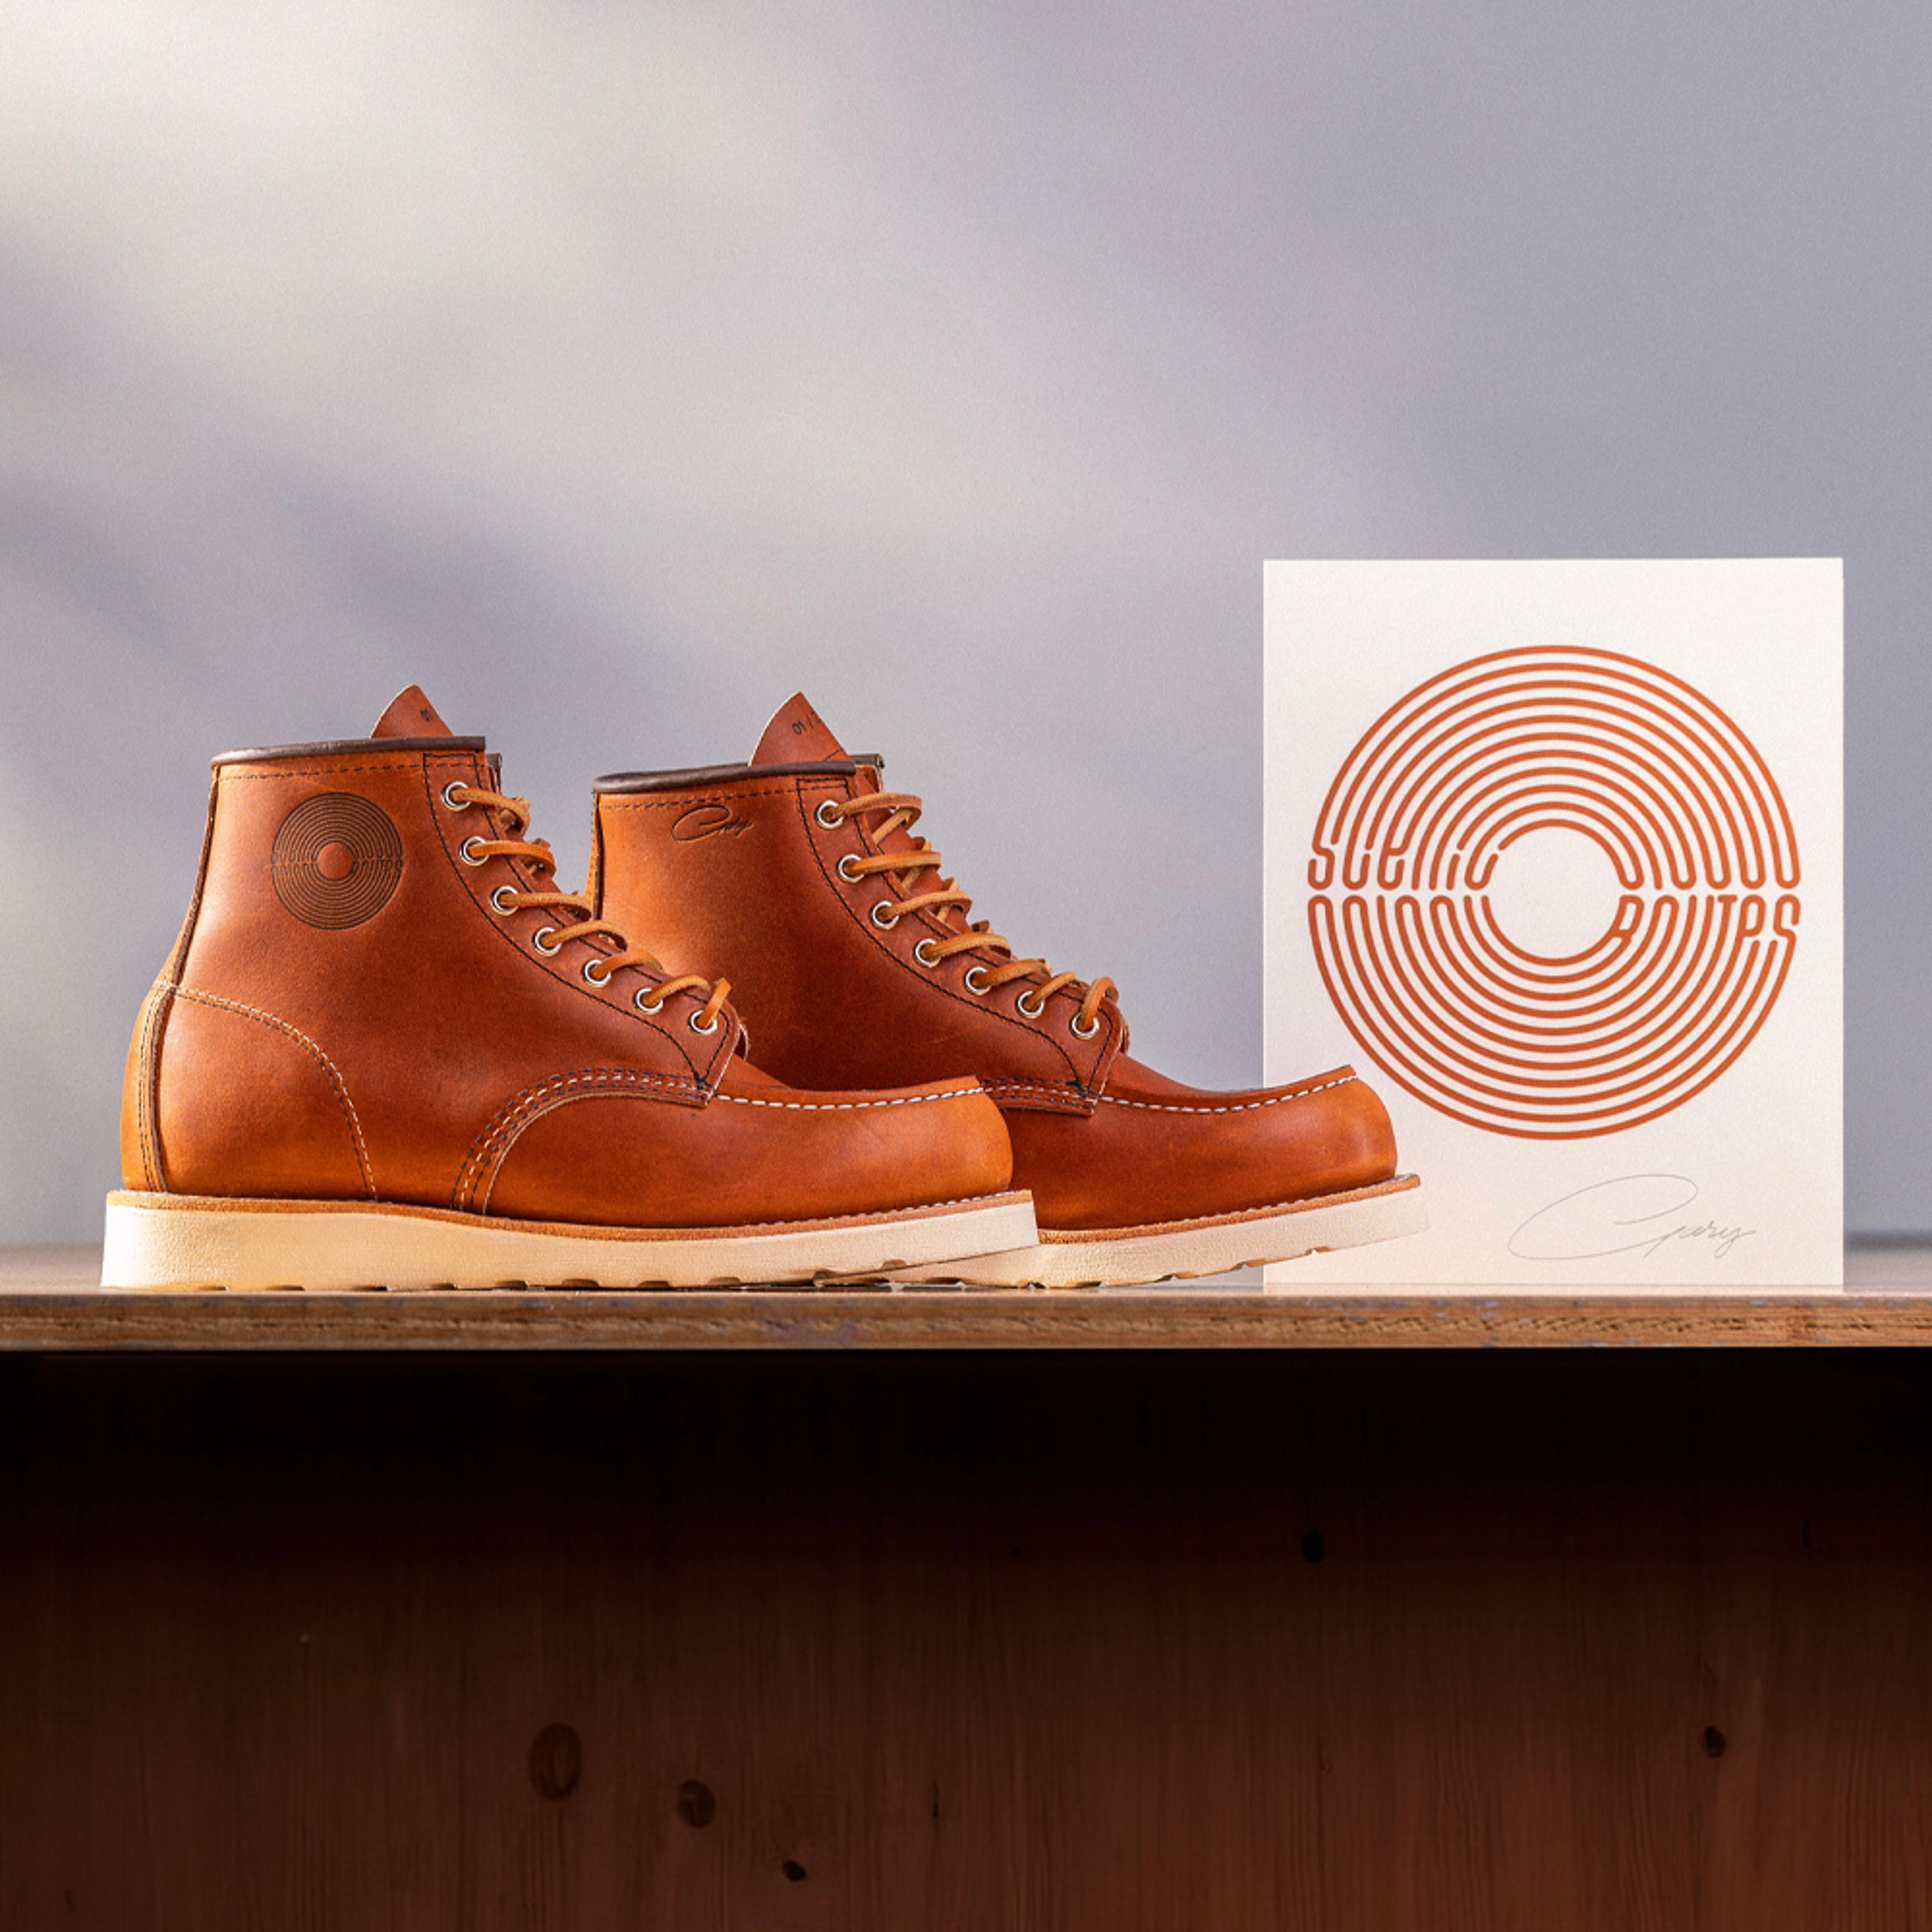 Gary Stranger / Red Wing — Artist Edition Boots